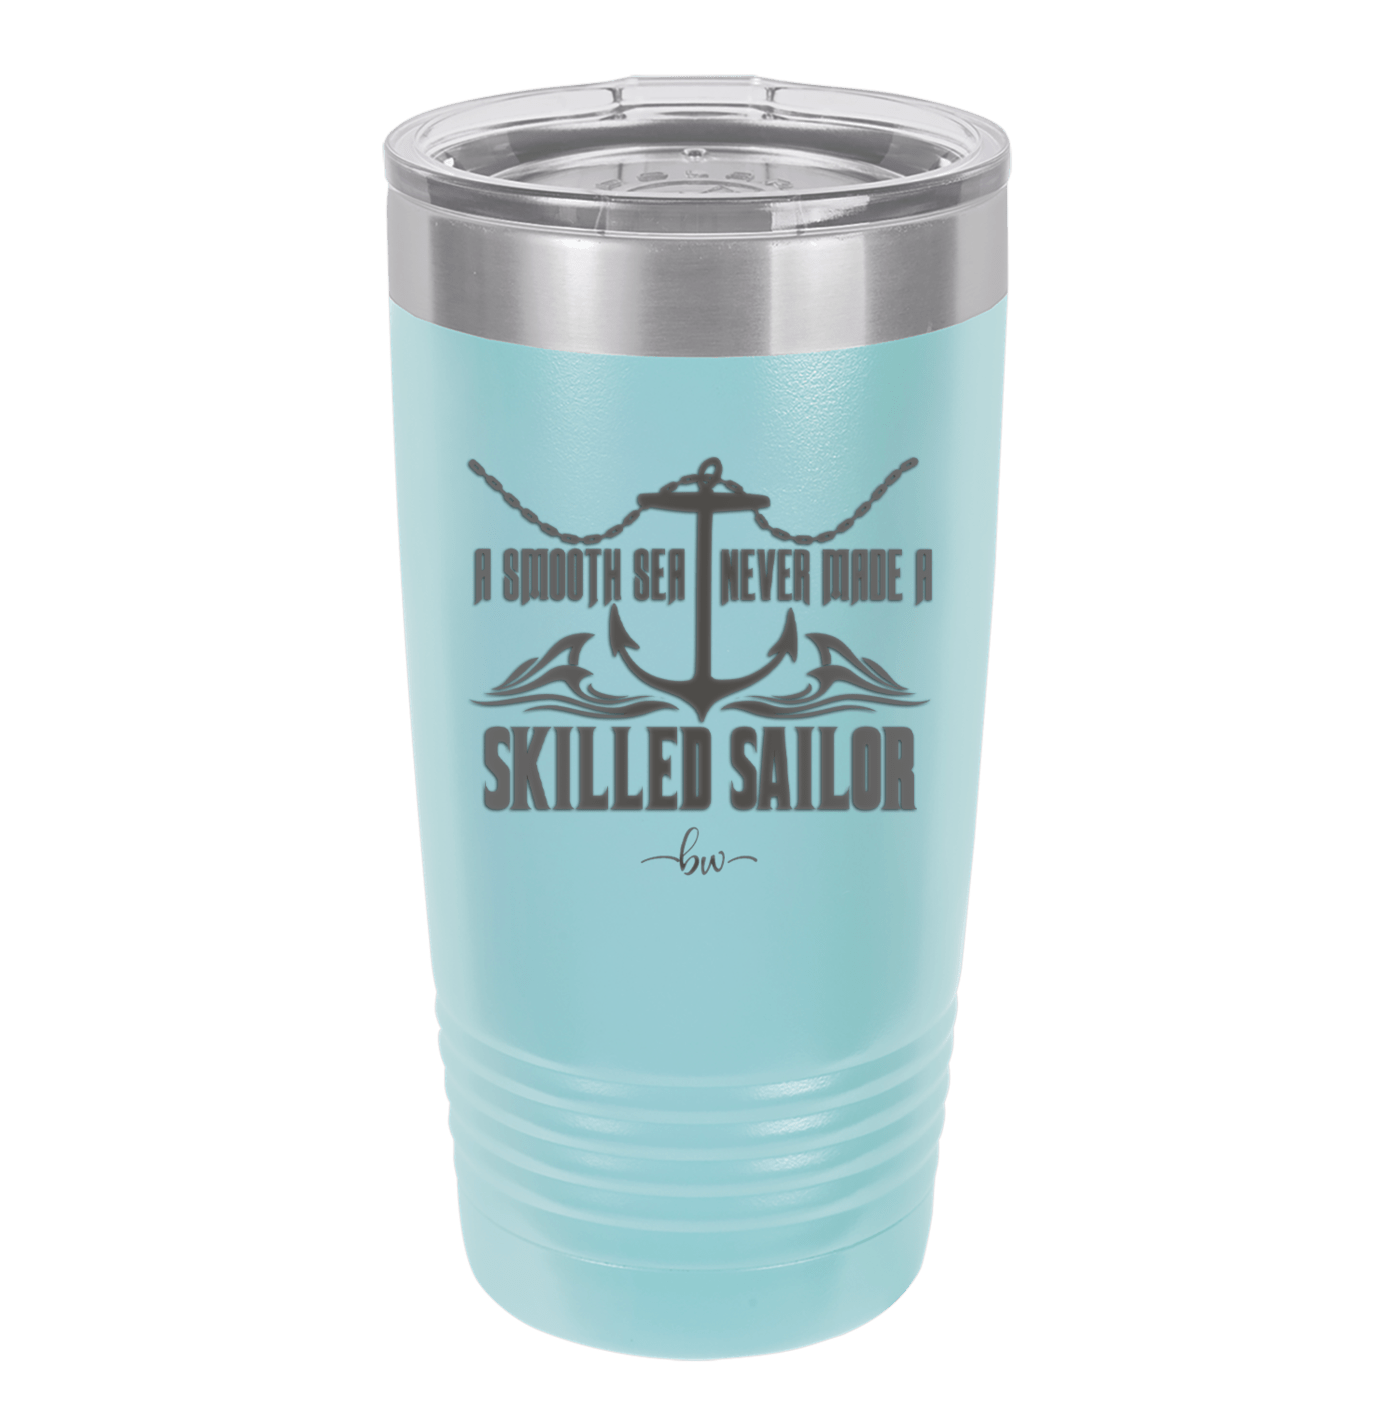 A Smooth Sea Never Made a Skilled Sailor 2 - Laser Engraved Stainless Steel Drinkware - 1427 -